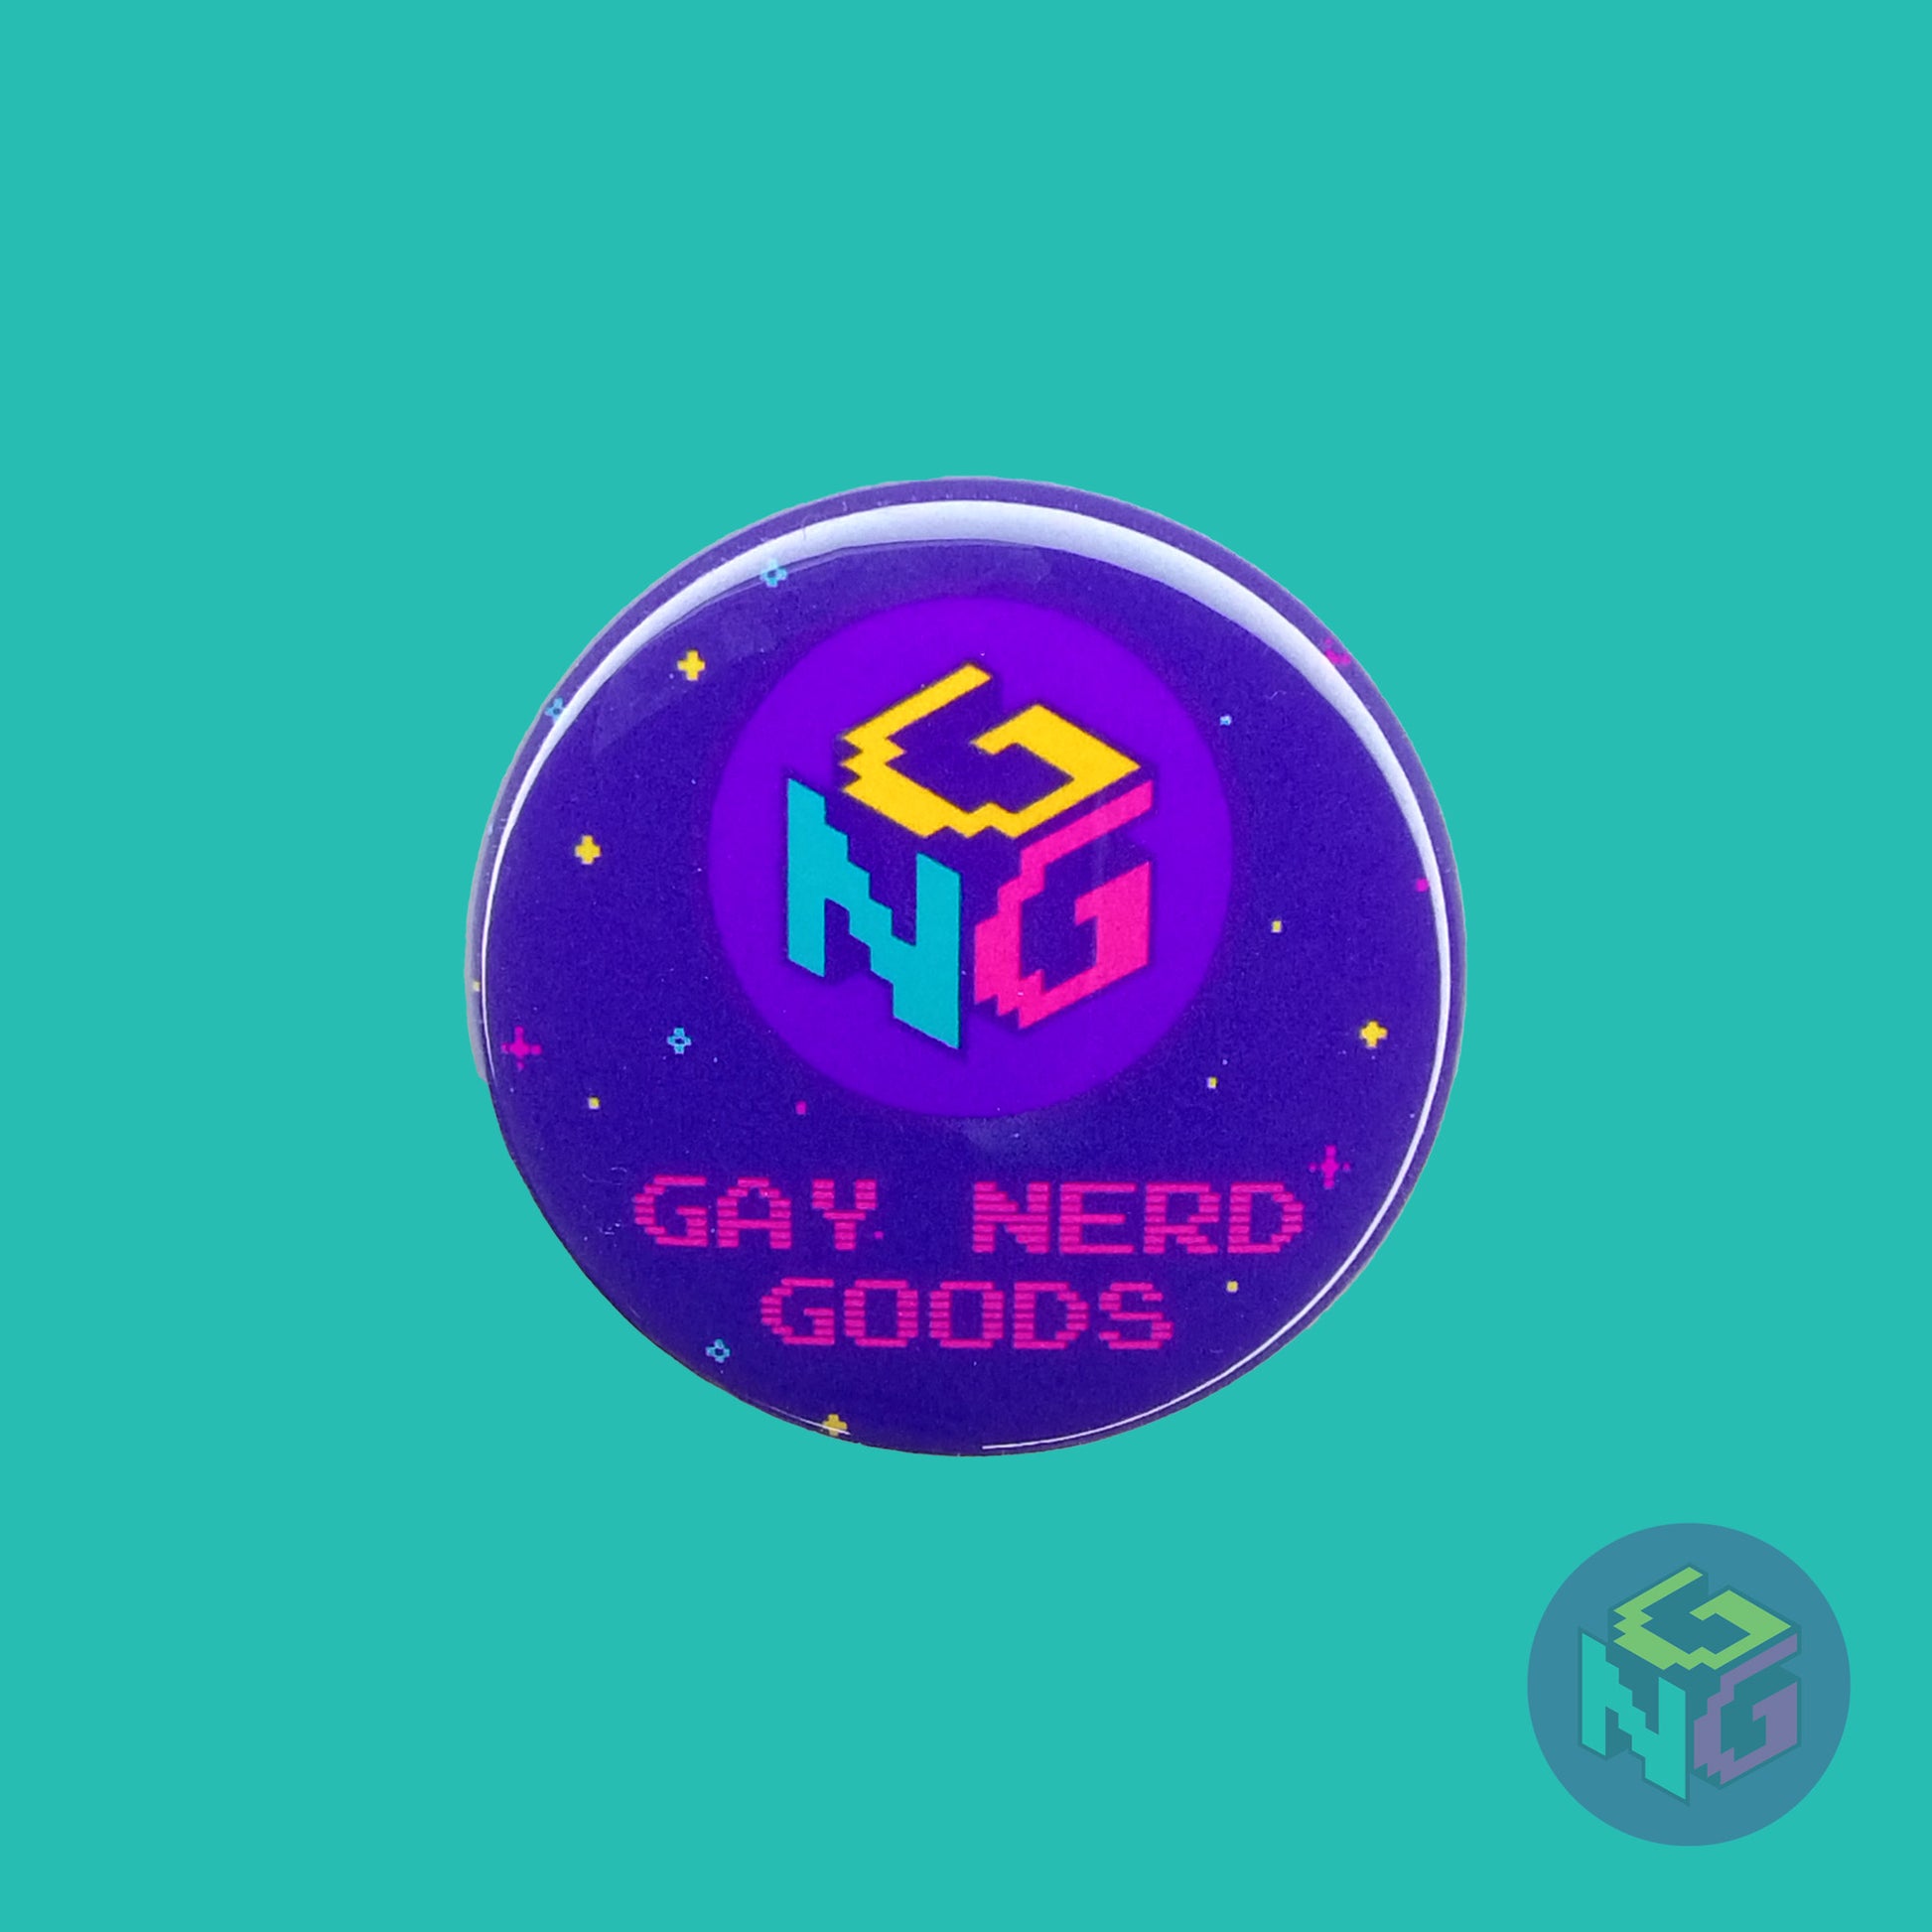 round gay nerd goods logo pin featuring the gay nerd goods 8 bit style GNG logo and text reading "gay nerd goods" on a background of dark purple with pink, yellow, and mint stars